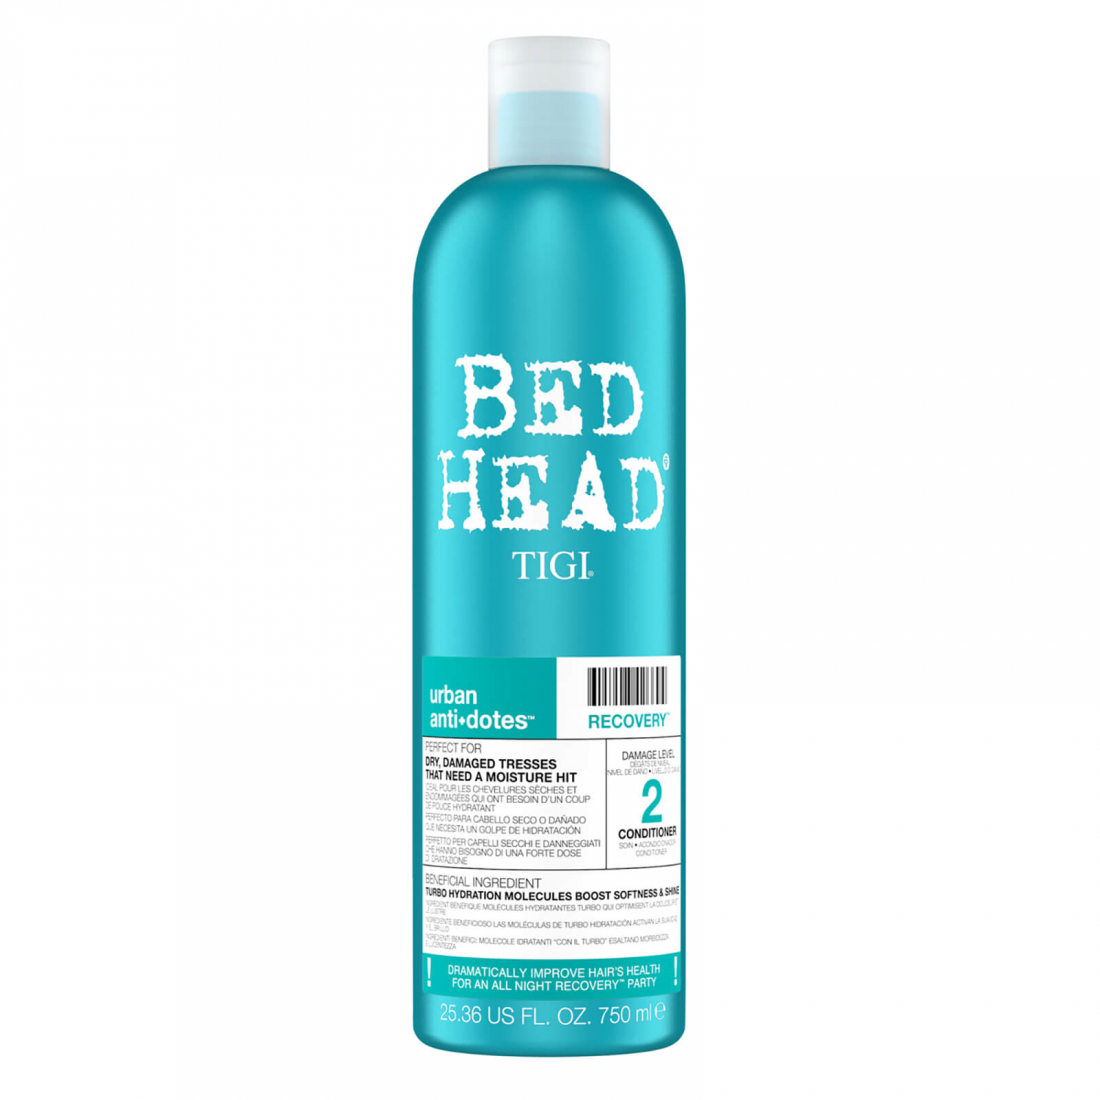 Après-shampoing 'Bed Head Urban Antidotes Recovery' - 750 ml